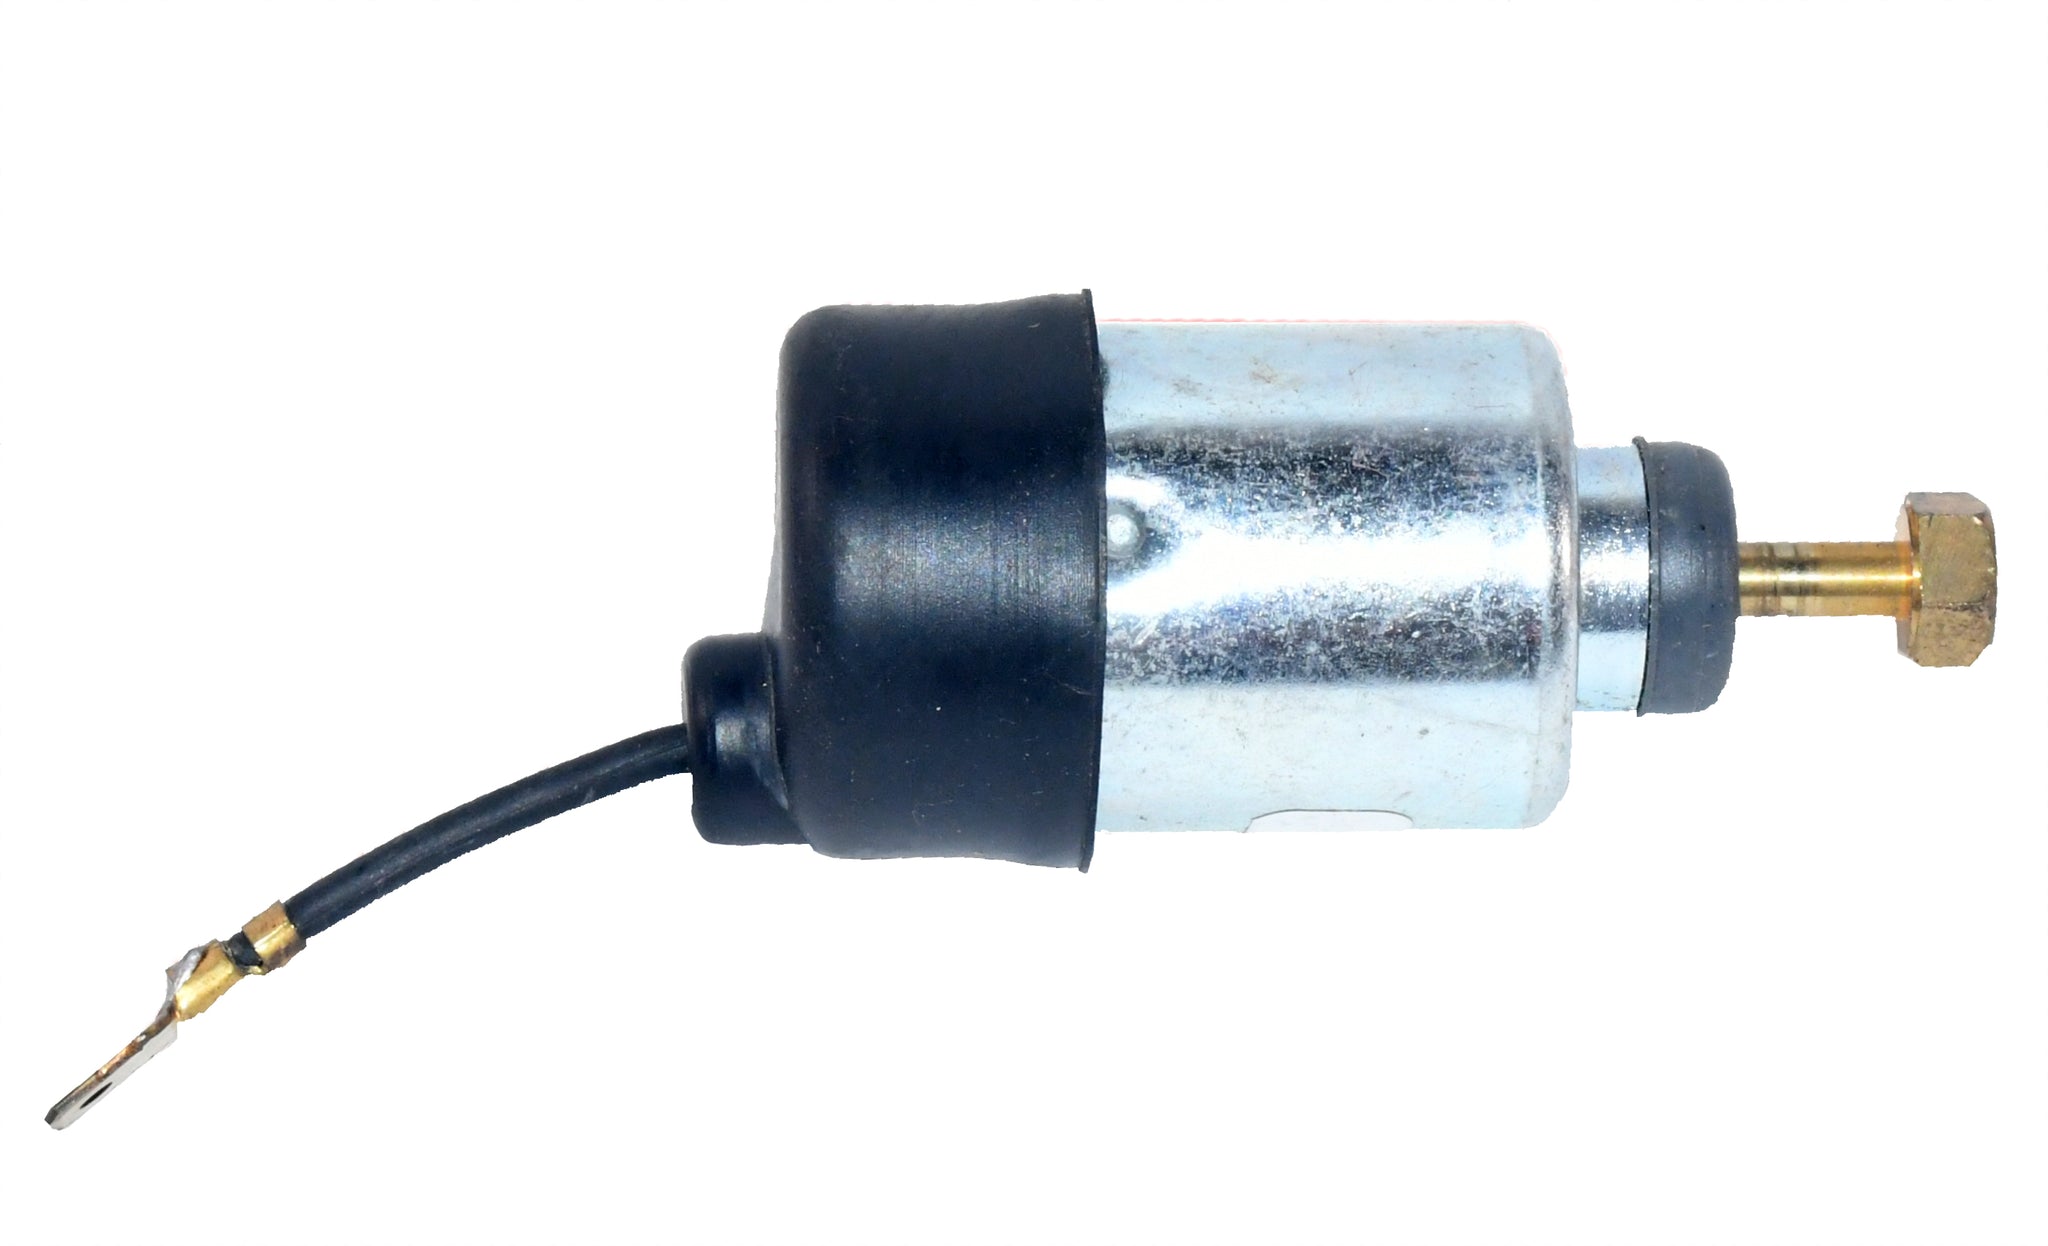 Idle stop solenoid for 1968-1978 GM vehicles with Rochester 2/4 barrel carburetor from Carter ECS-13